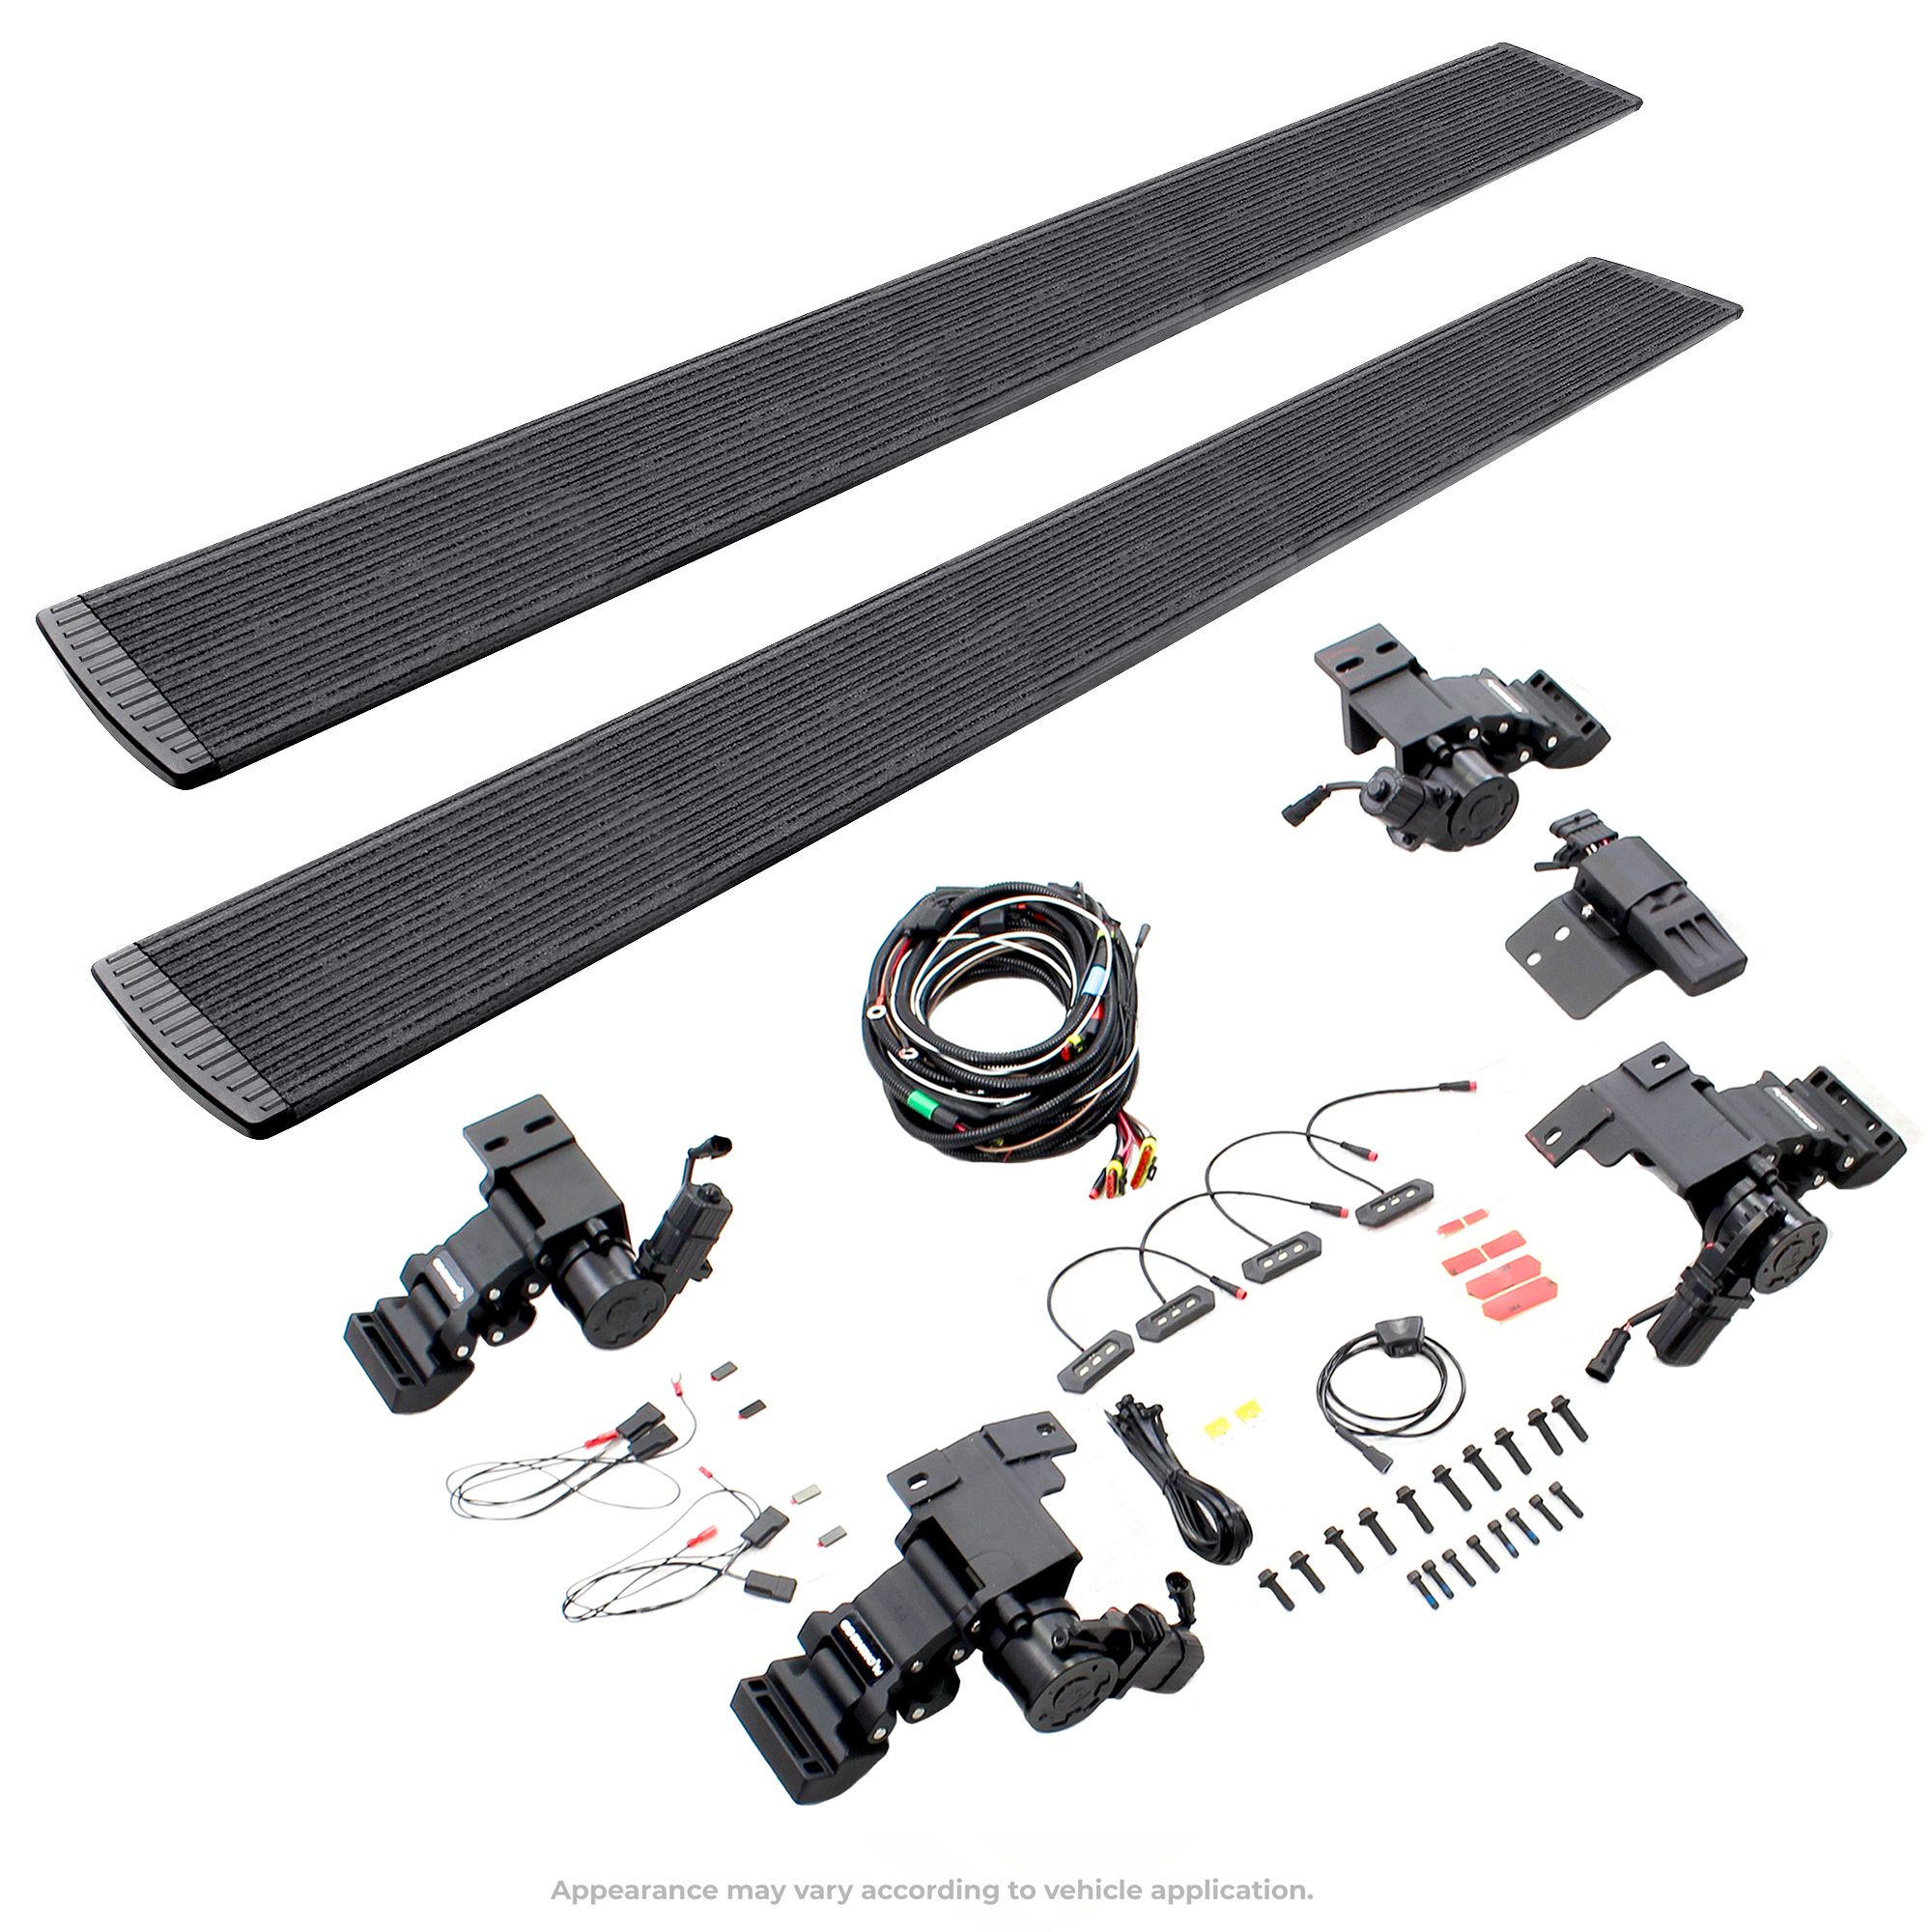 Go Rhino 20441587T - E1 Electric Running Boards With Mounting Brackets - Protective Bedliner Coating